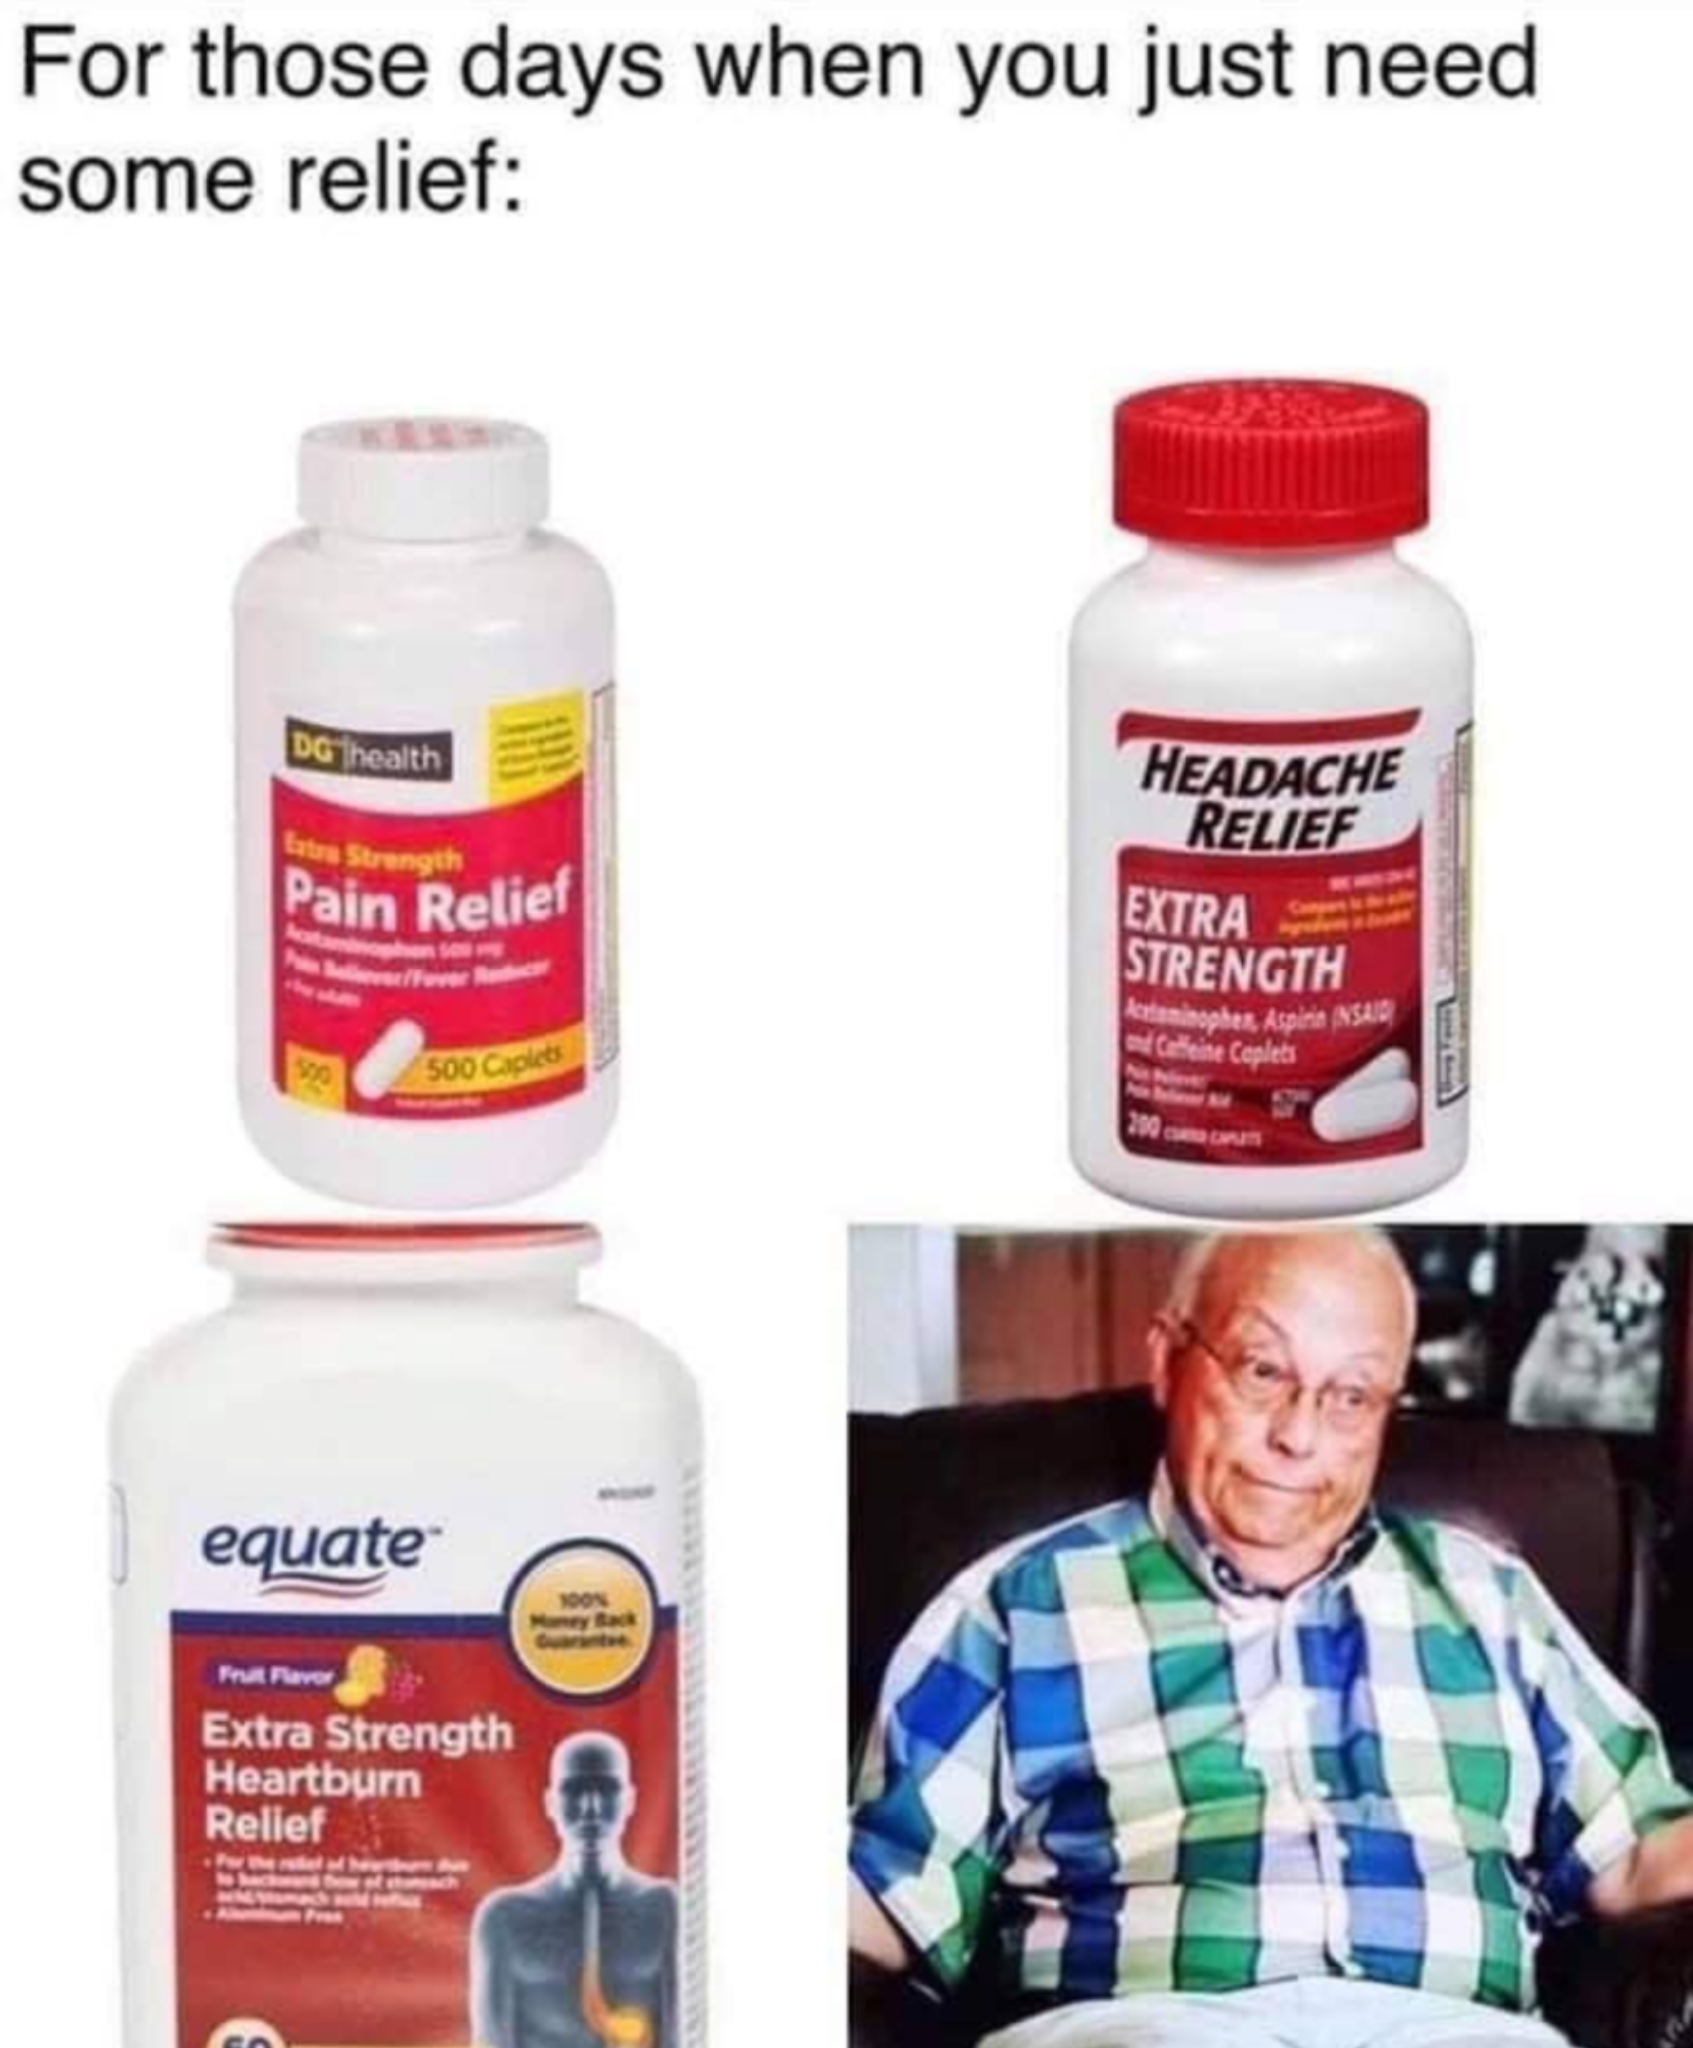 memes from abducted in plain sight - For those days when you just need some relief Drenthe Pain Relief Headache Relief Extra Strength equate Extra Strength Heartburn Relief